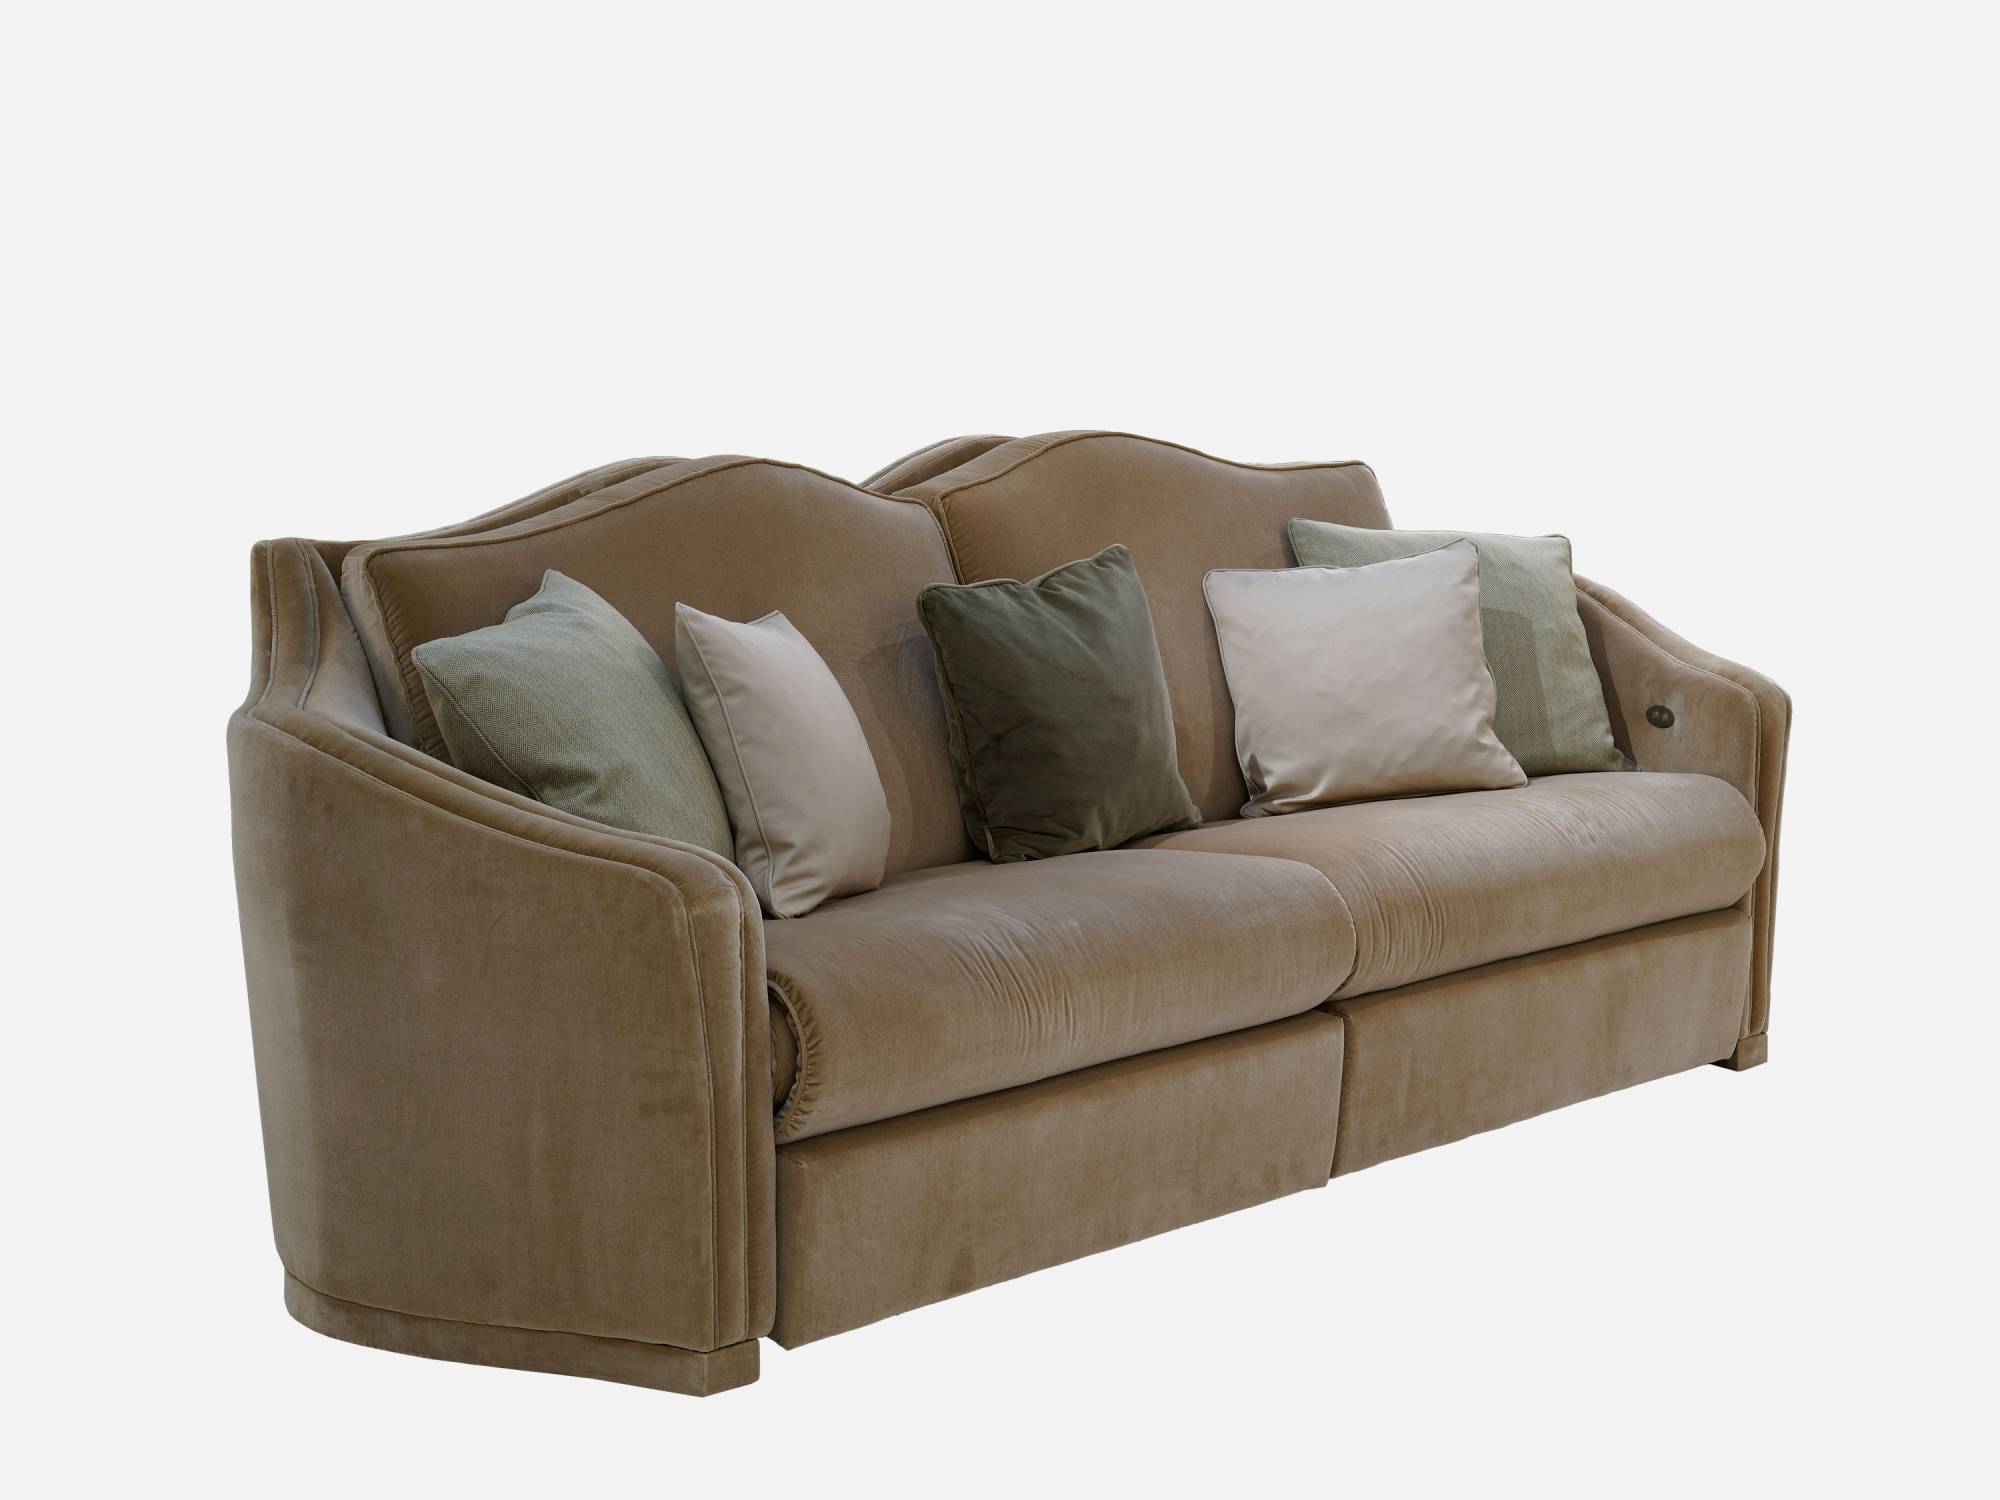 ART. 2184 – The elegance of luxury classic Sofas made in Italy by C.G. Capelletti.